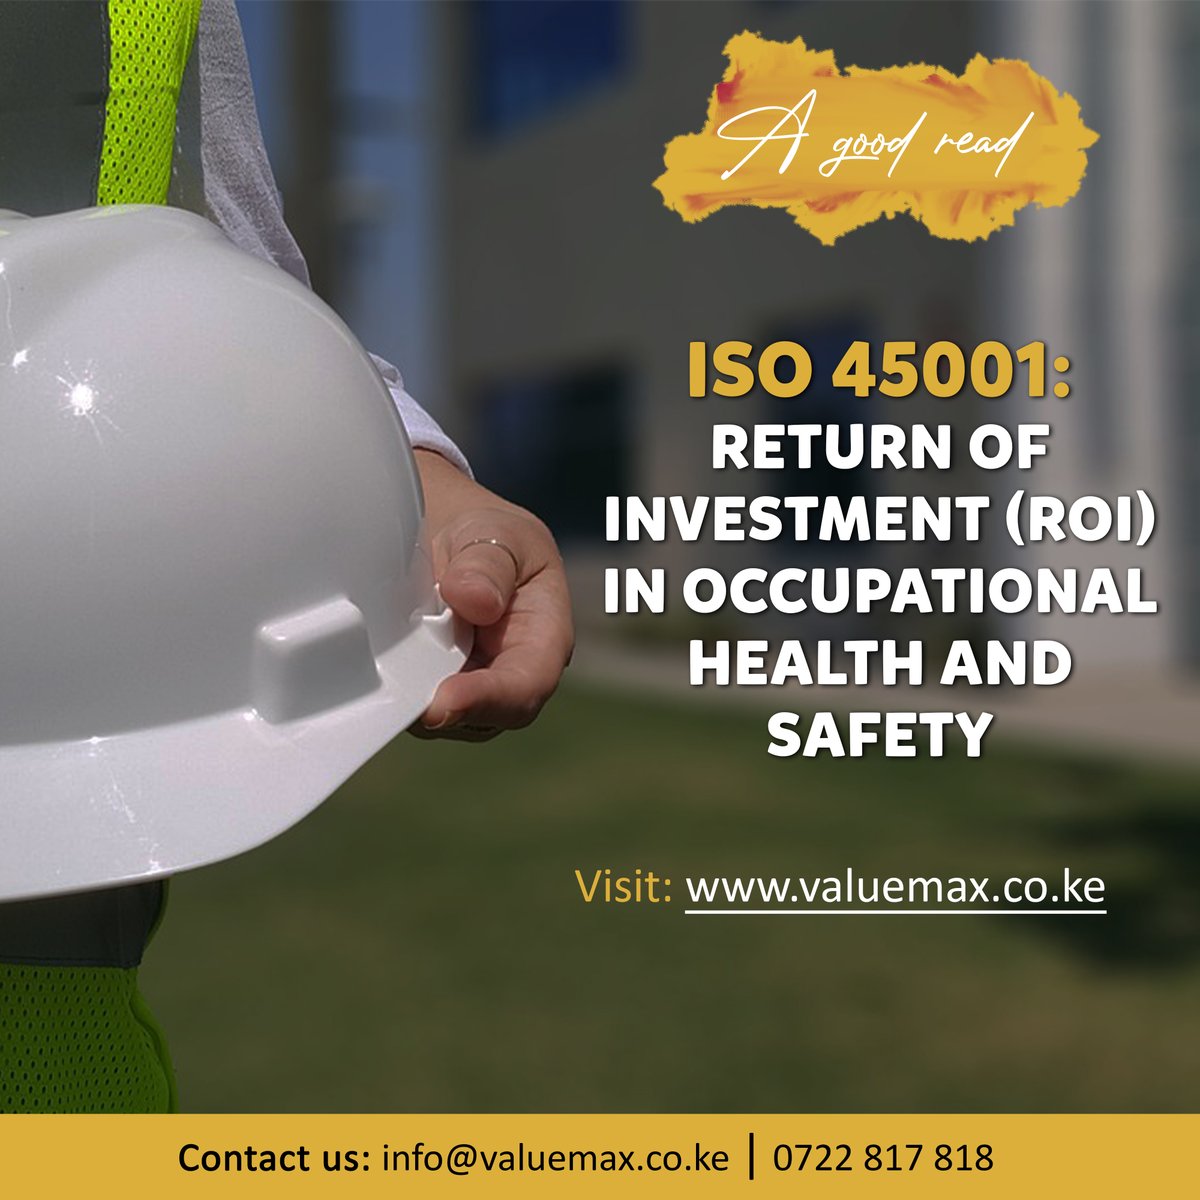 In workplace safety and employee well-being, ISO 45001 is a beacon of best practices. Enjoy this read as it brings insight into the ROI of investing in the HSE of the workforce.

Read more on this: valuemax.co.ke/2024/03/07/iso… 

#ISO45001 #OccupationalSafety #Valuemax #ISOStandards